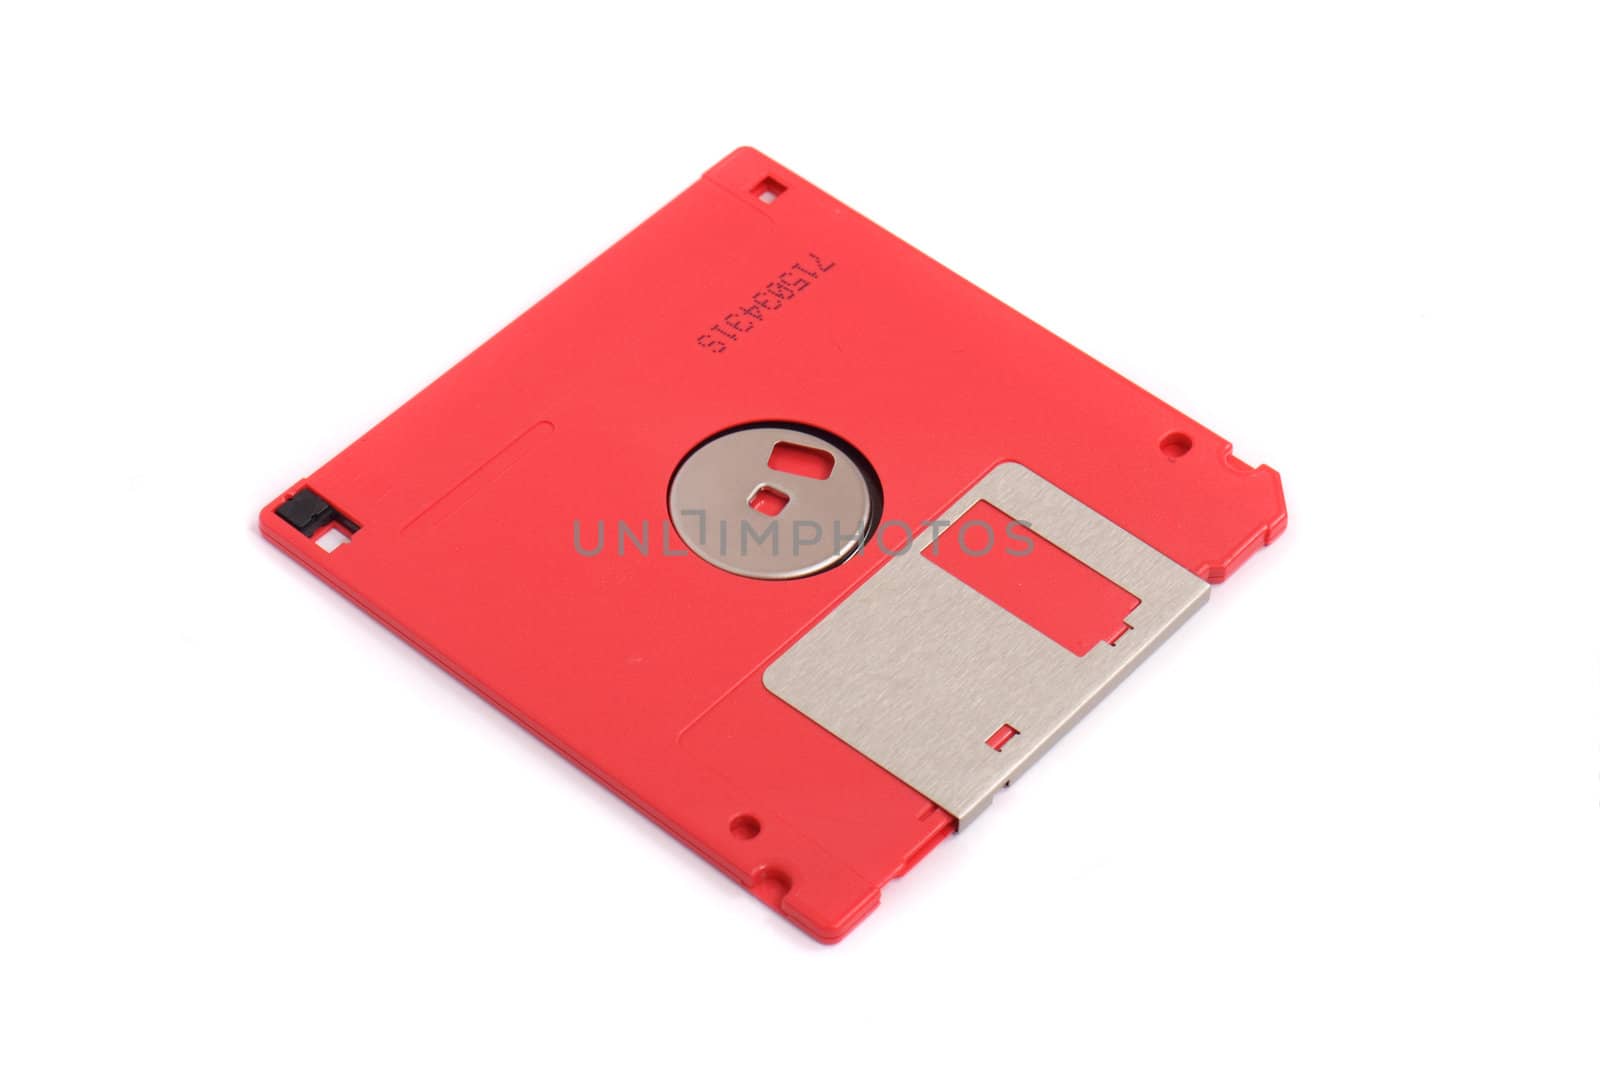 red floppy disk on the white background